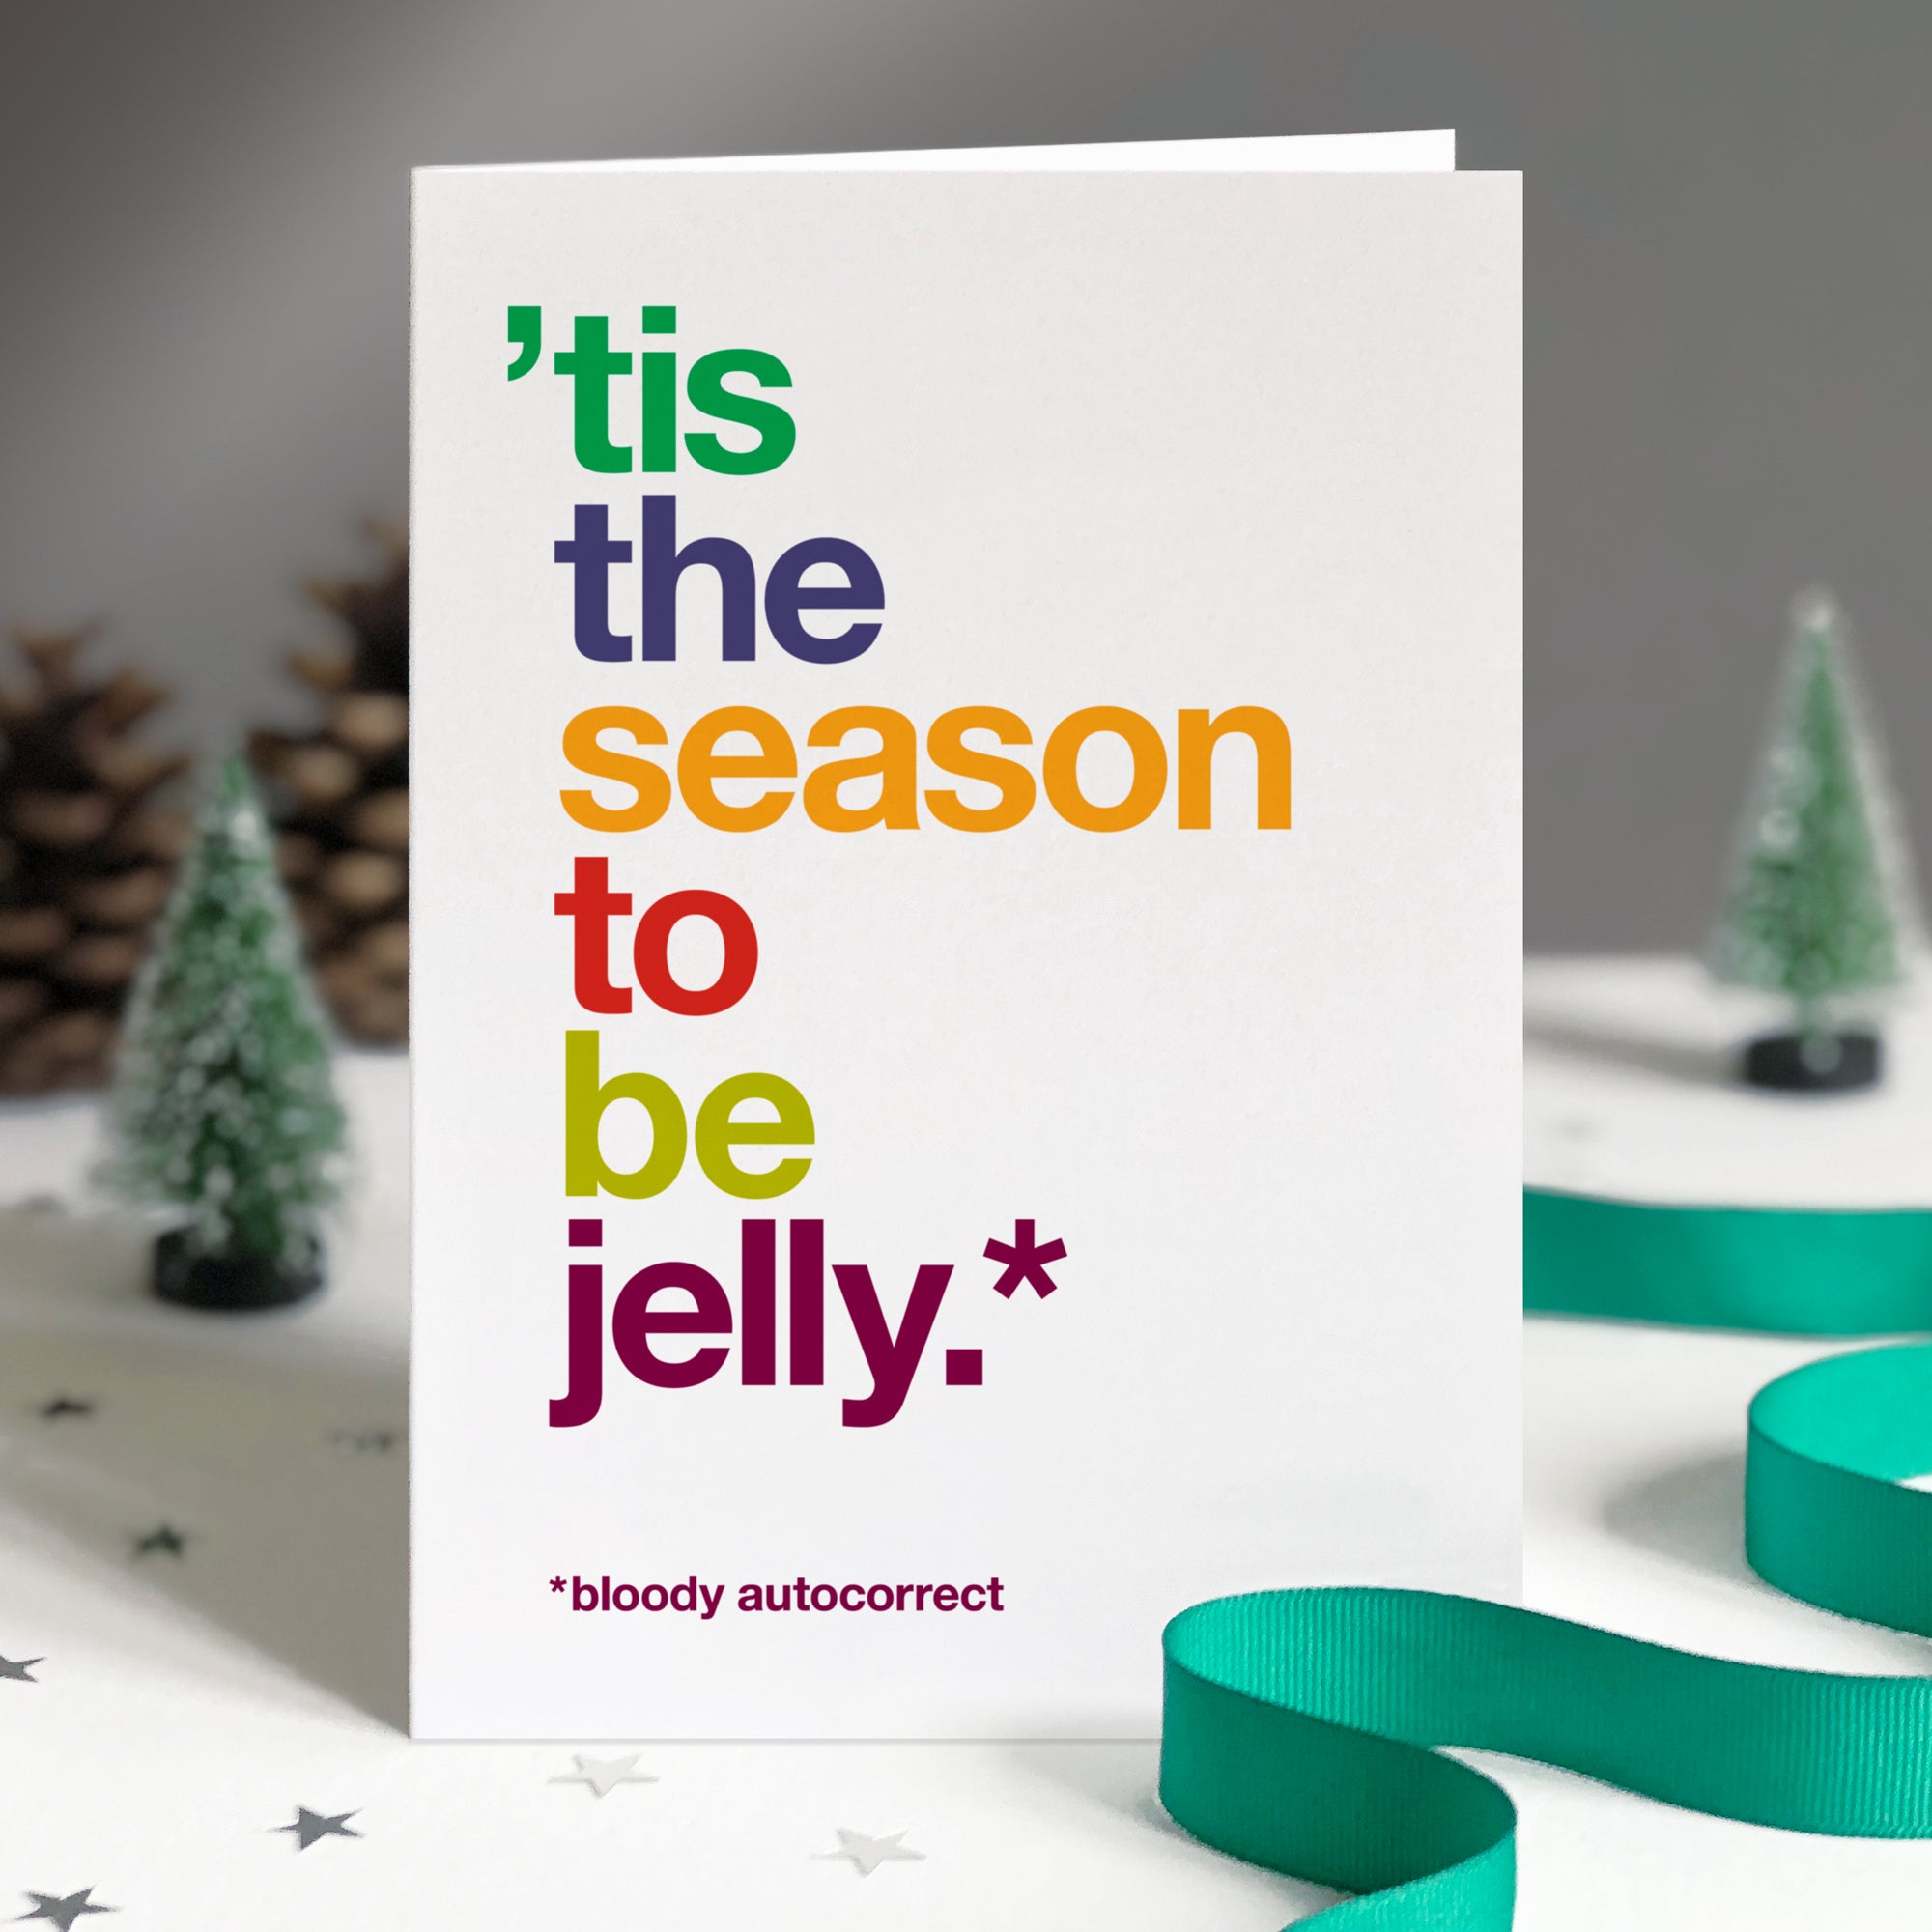 Funny christmas card autocorrected to 'tis the season to be jelly'.